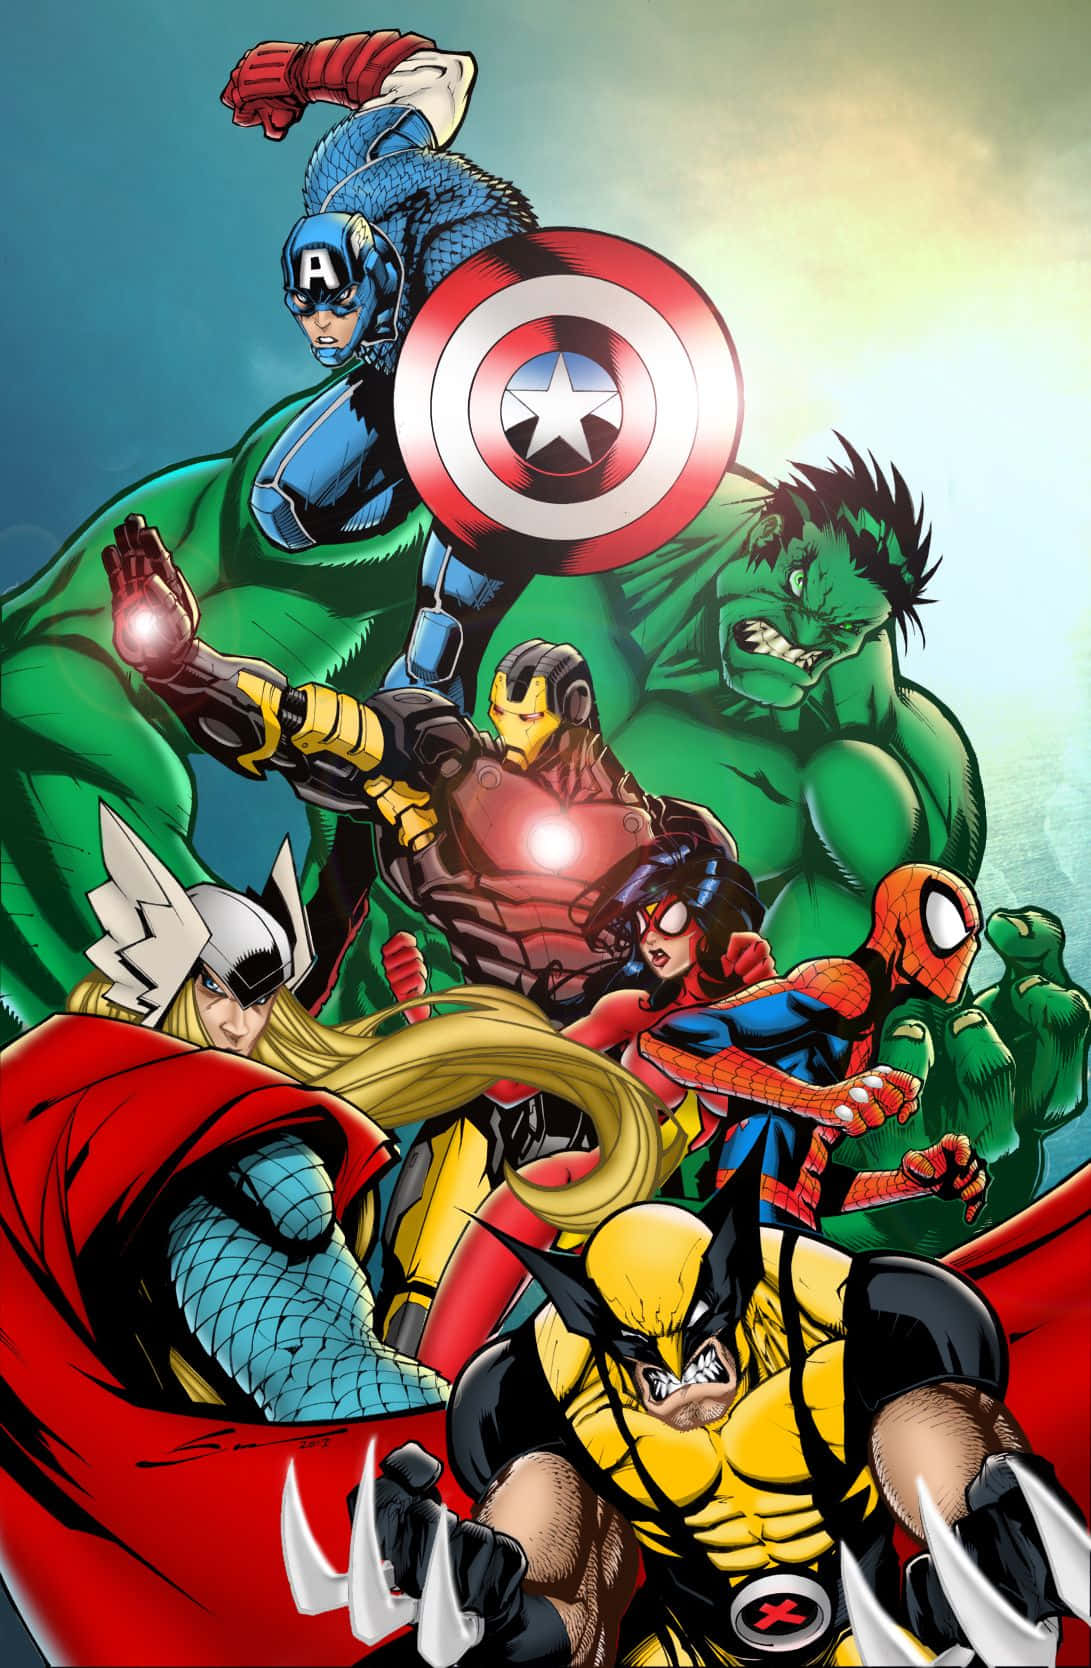 Unite the mightiest heroes of earth to save the world! Wallpaper